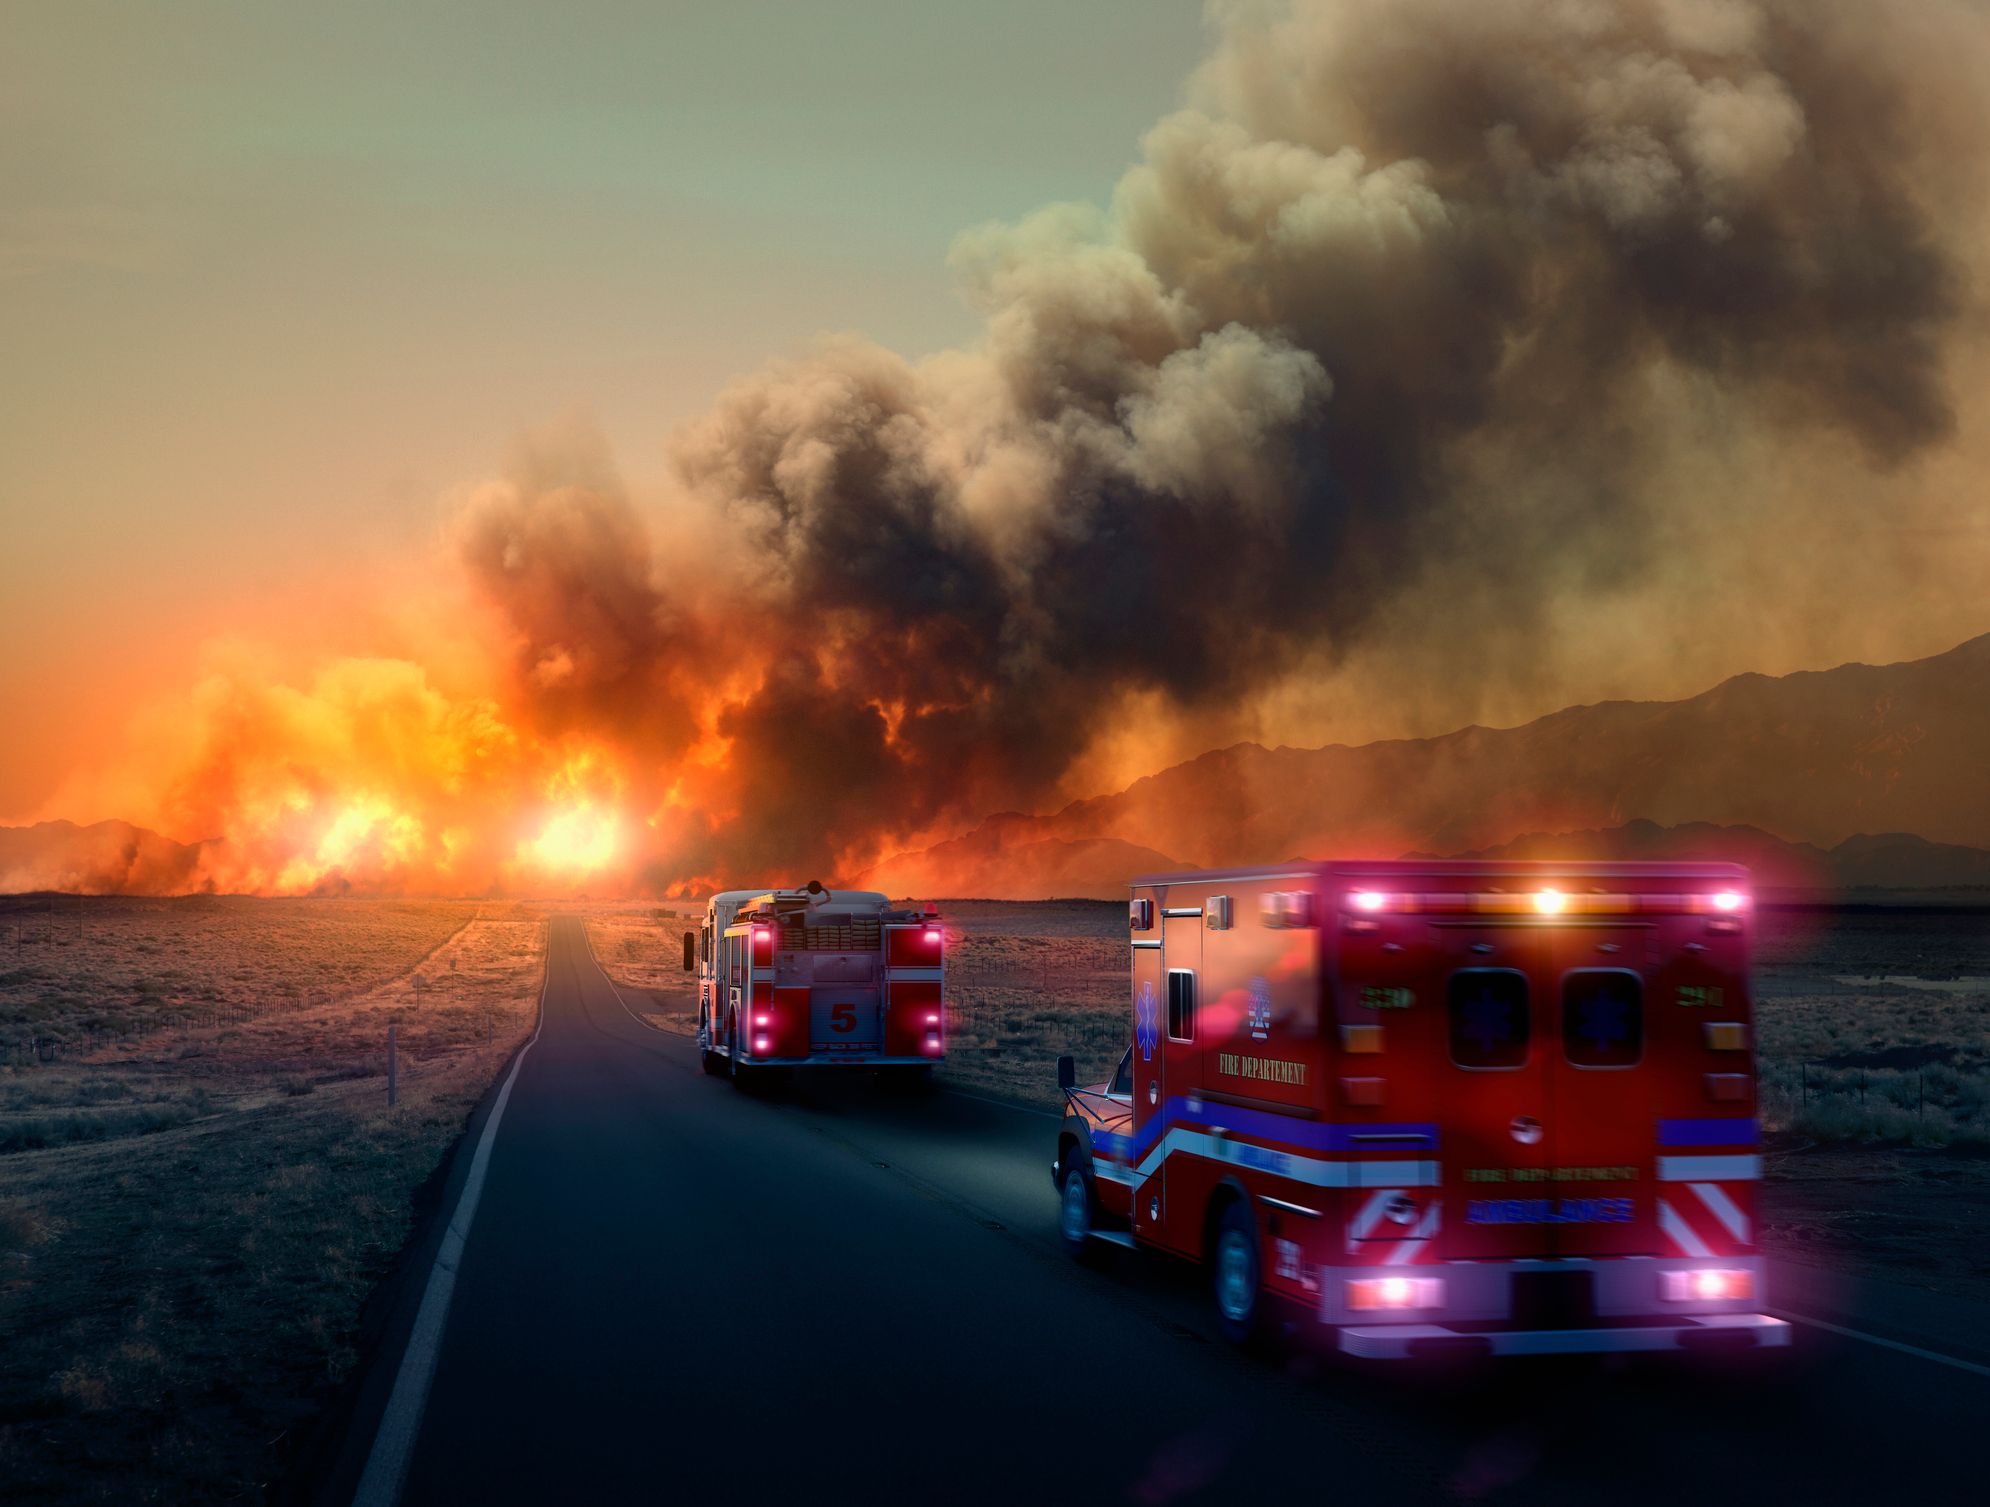 Ambulances going toward a fire in the woods. | Source: Getty Images